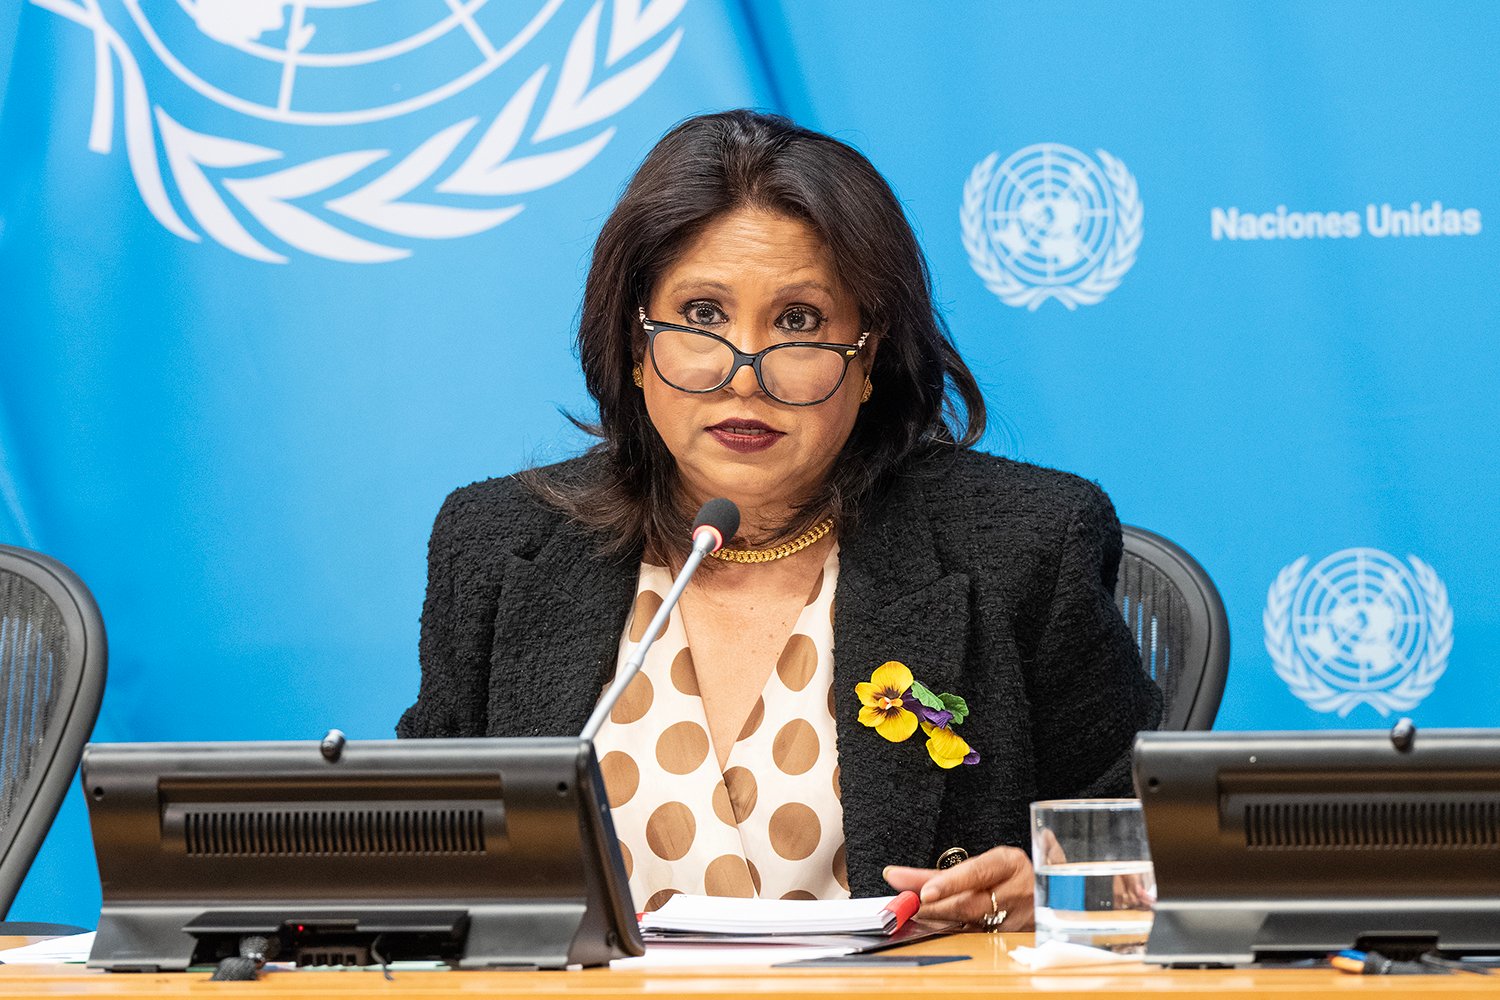 A woman wearing glasses, a dark blazer, dotted blouse, with a flower on her lapel speaks into a small microphone from a dais in front of a Naciones Unidas U.N. sign. behind her on the wall.